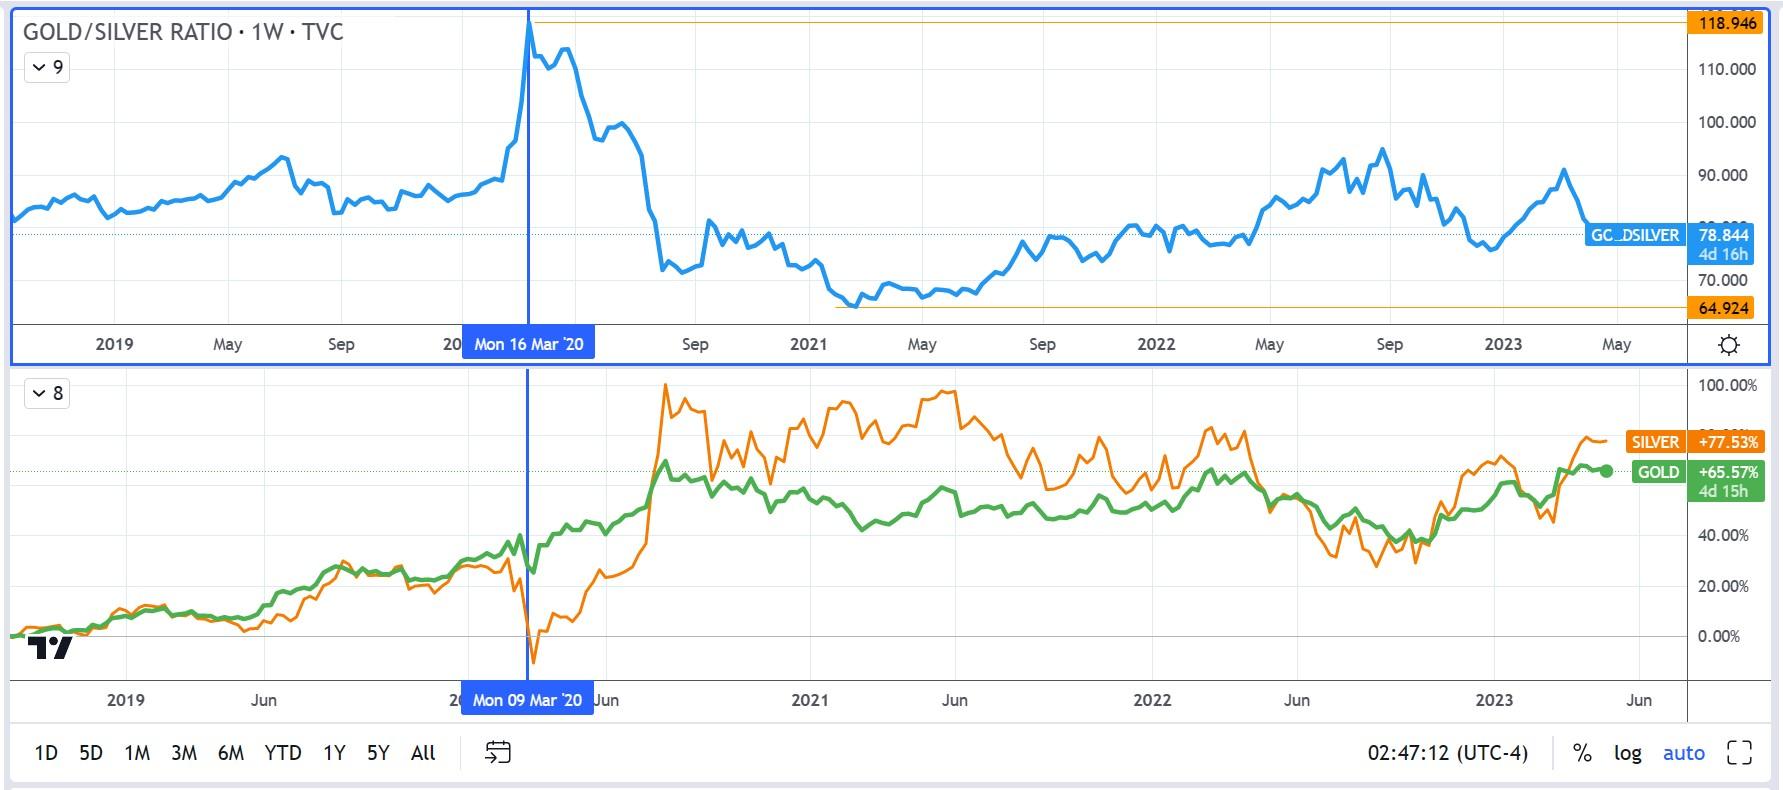 Correlation between silver and gold and gold silver ratio on the weekly chart. Source: www.tradingview.com